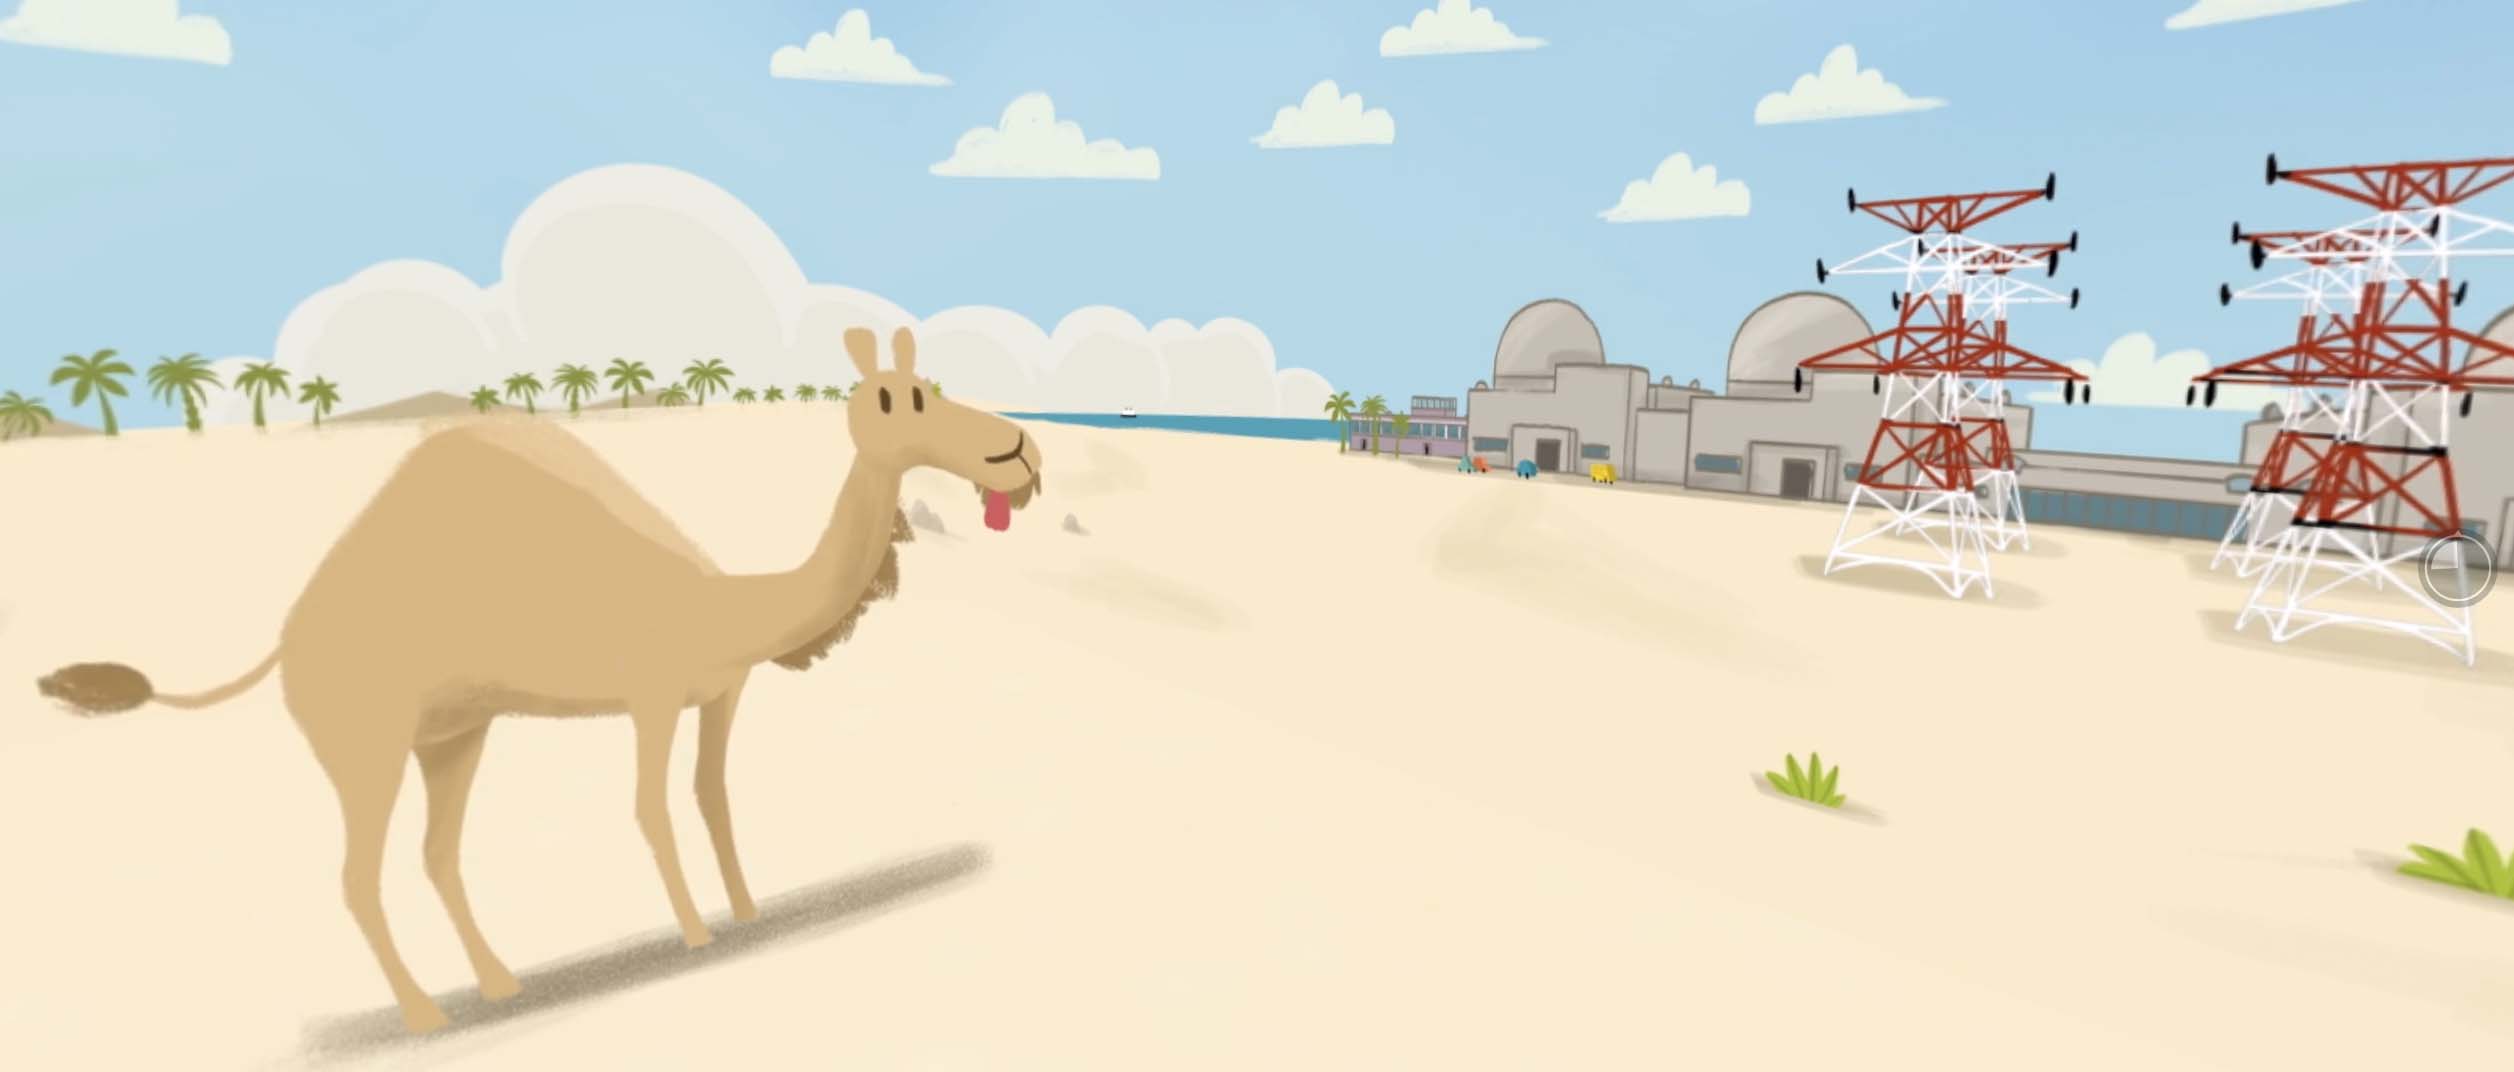 360 animated educational video using illustration for children by We Are Alive, an animation studio in Dubai and the UK